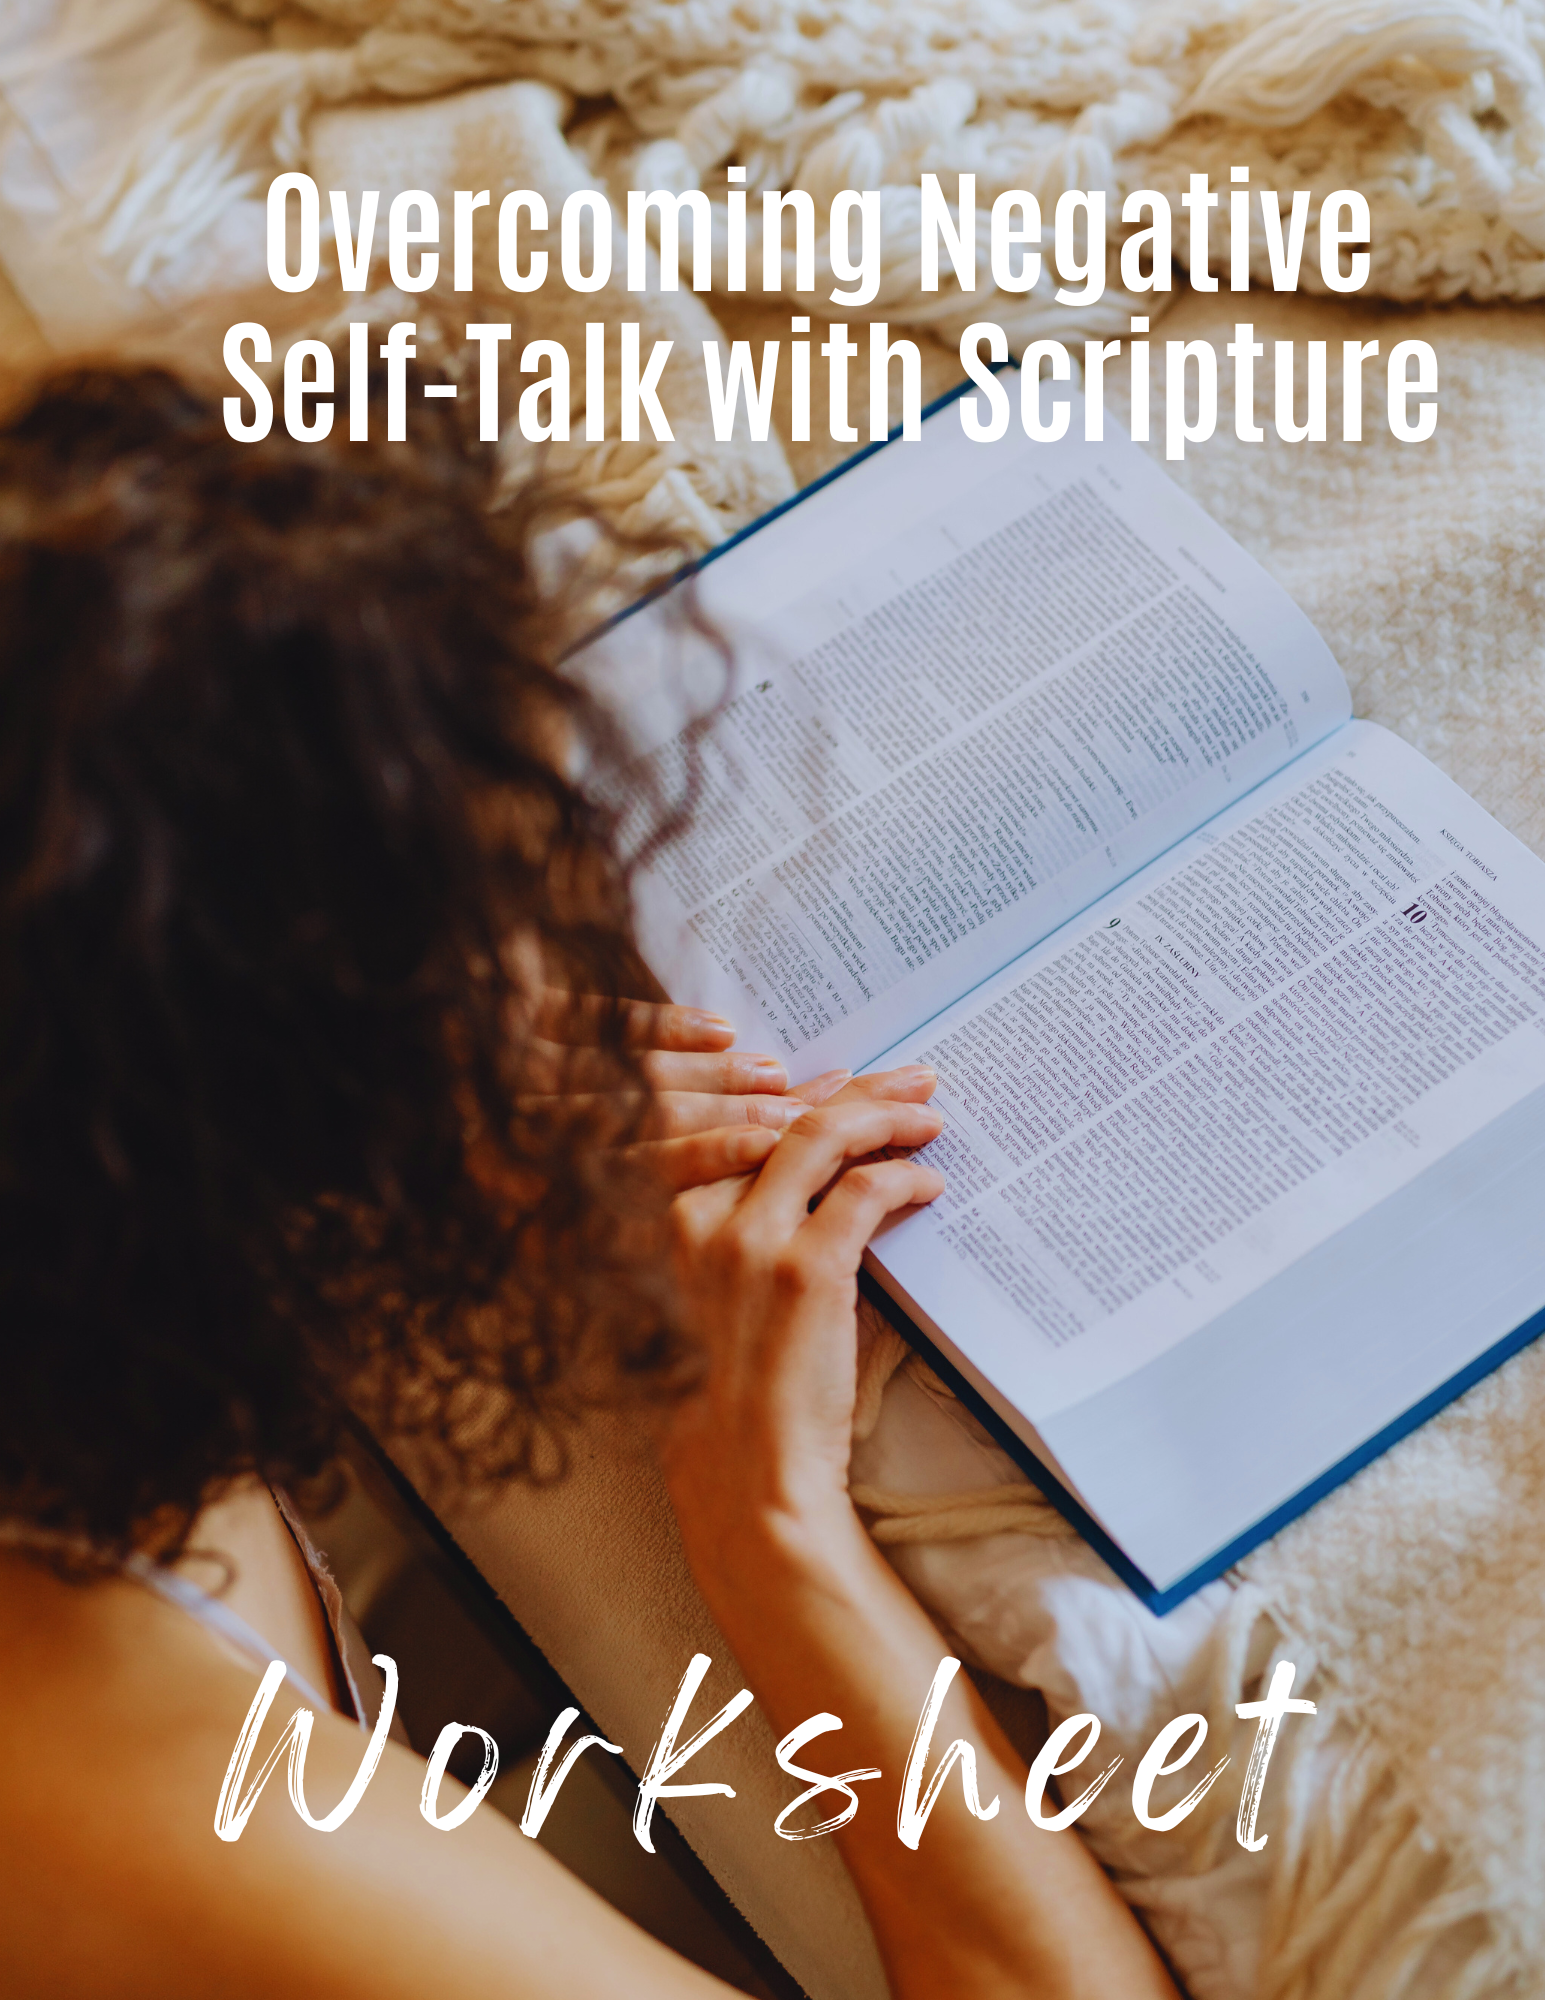 Discover the transformative power of scripture with our 1-page worksheet, “Overcoming Negative Self-Talk with Scripture”.